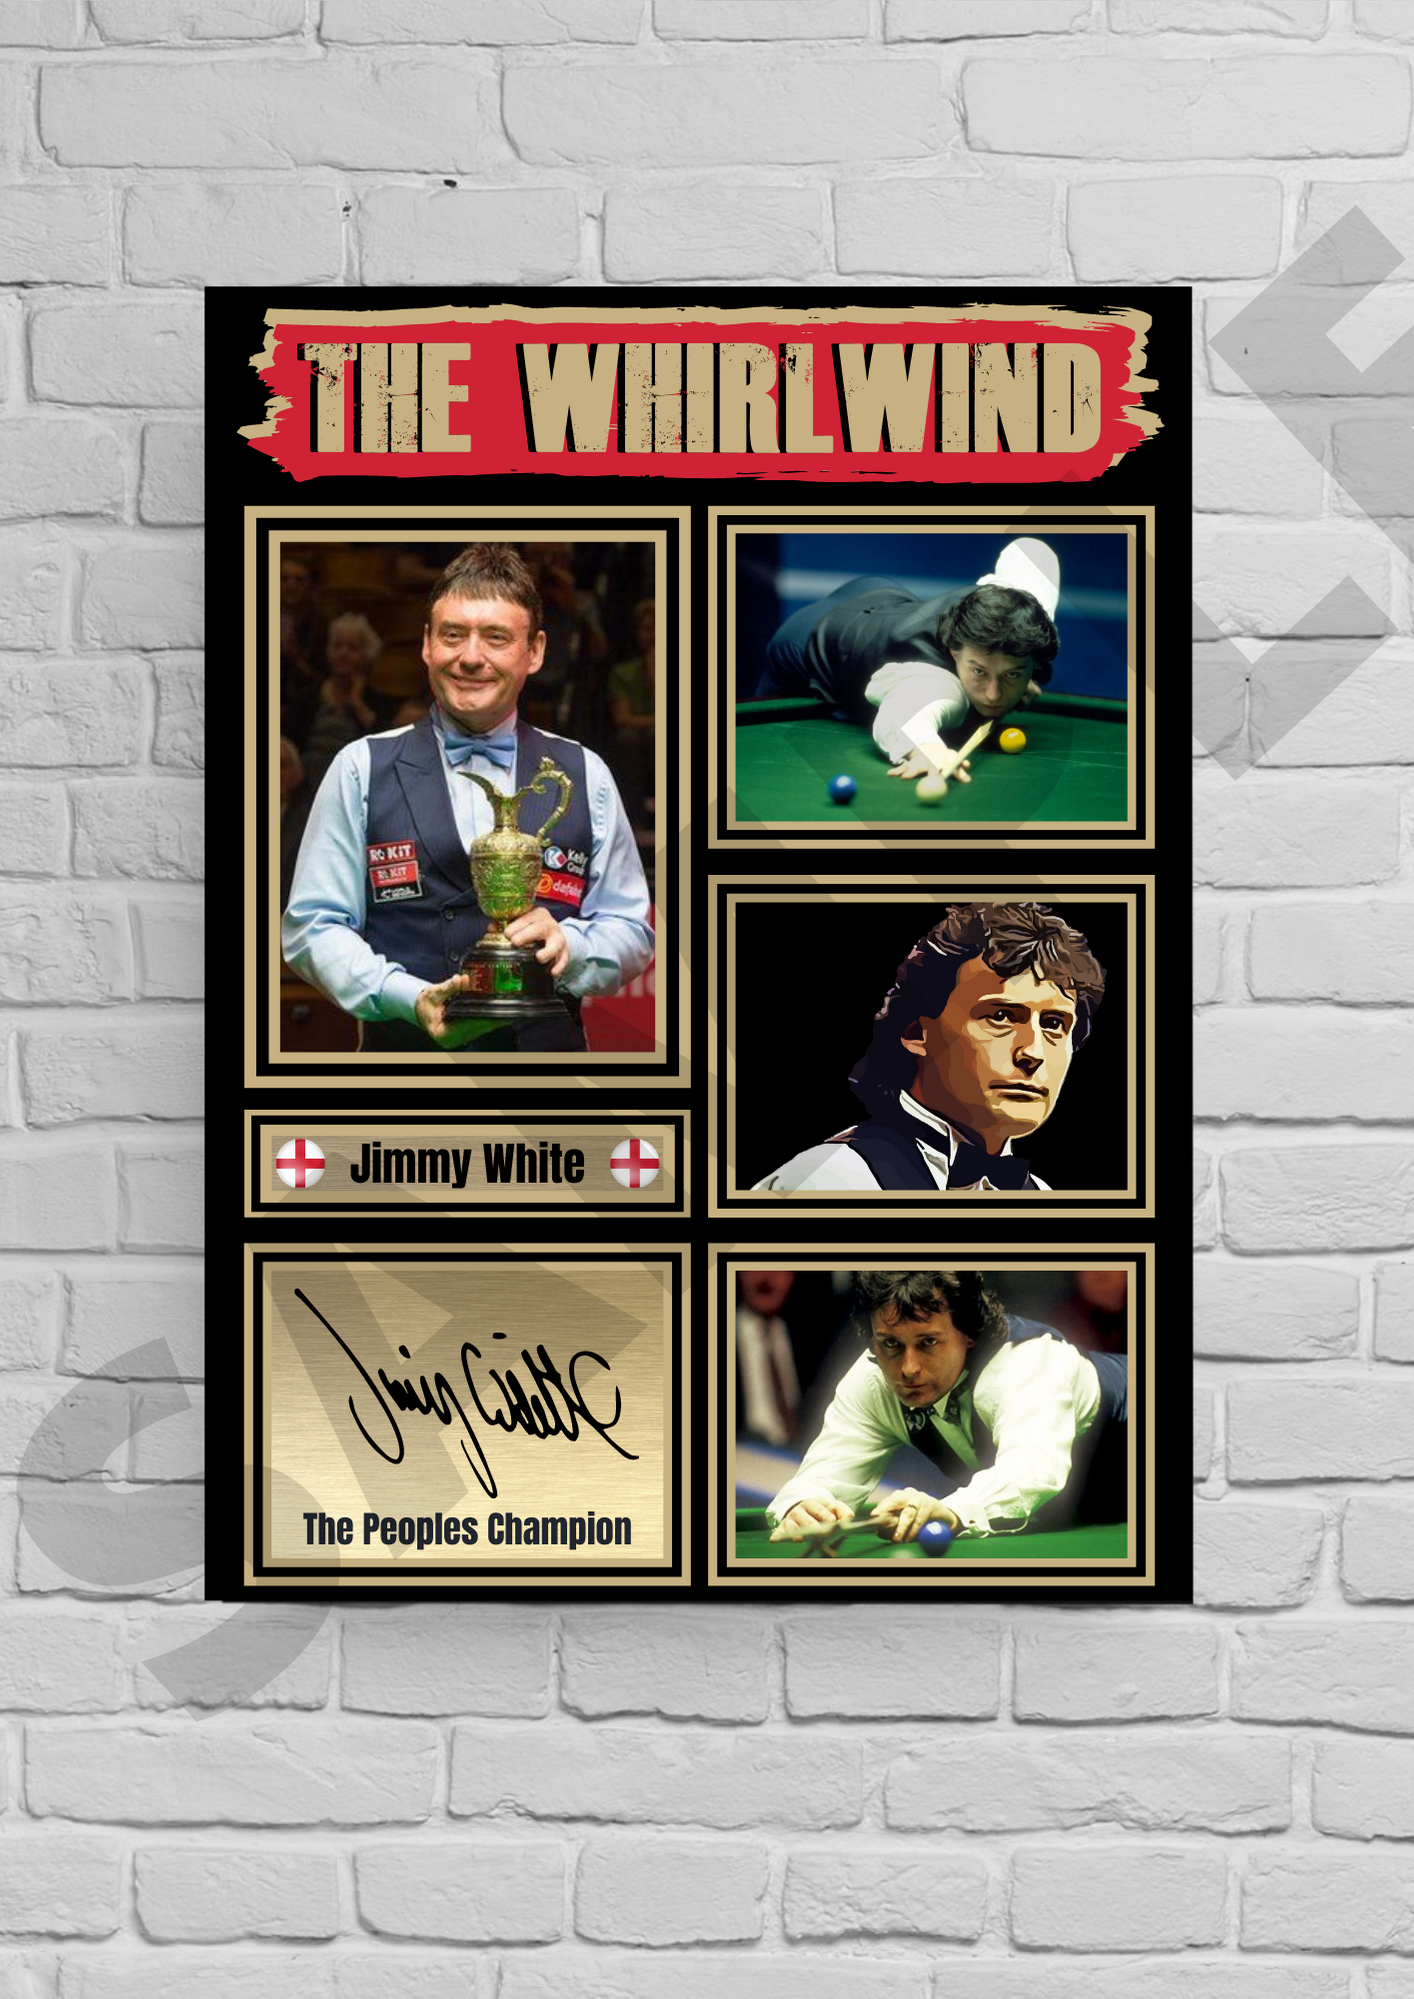 Jimmy 'Whirlwind' White (Snooker) #18 - Memorabilia/Collectable Signed print